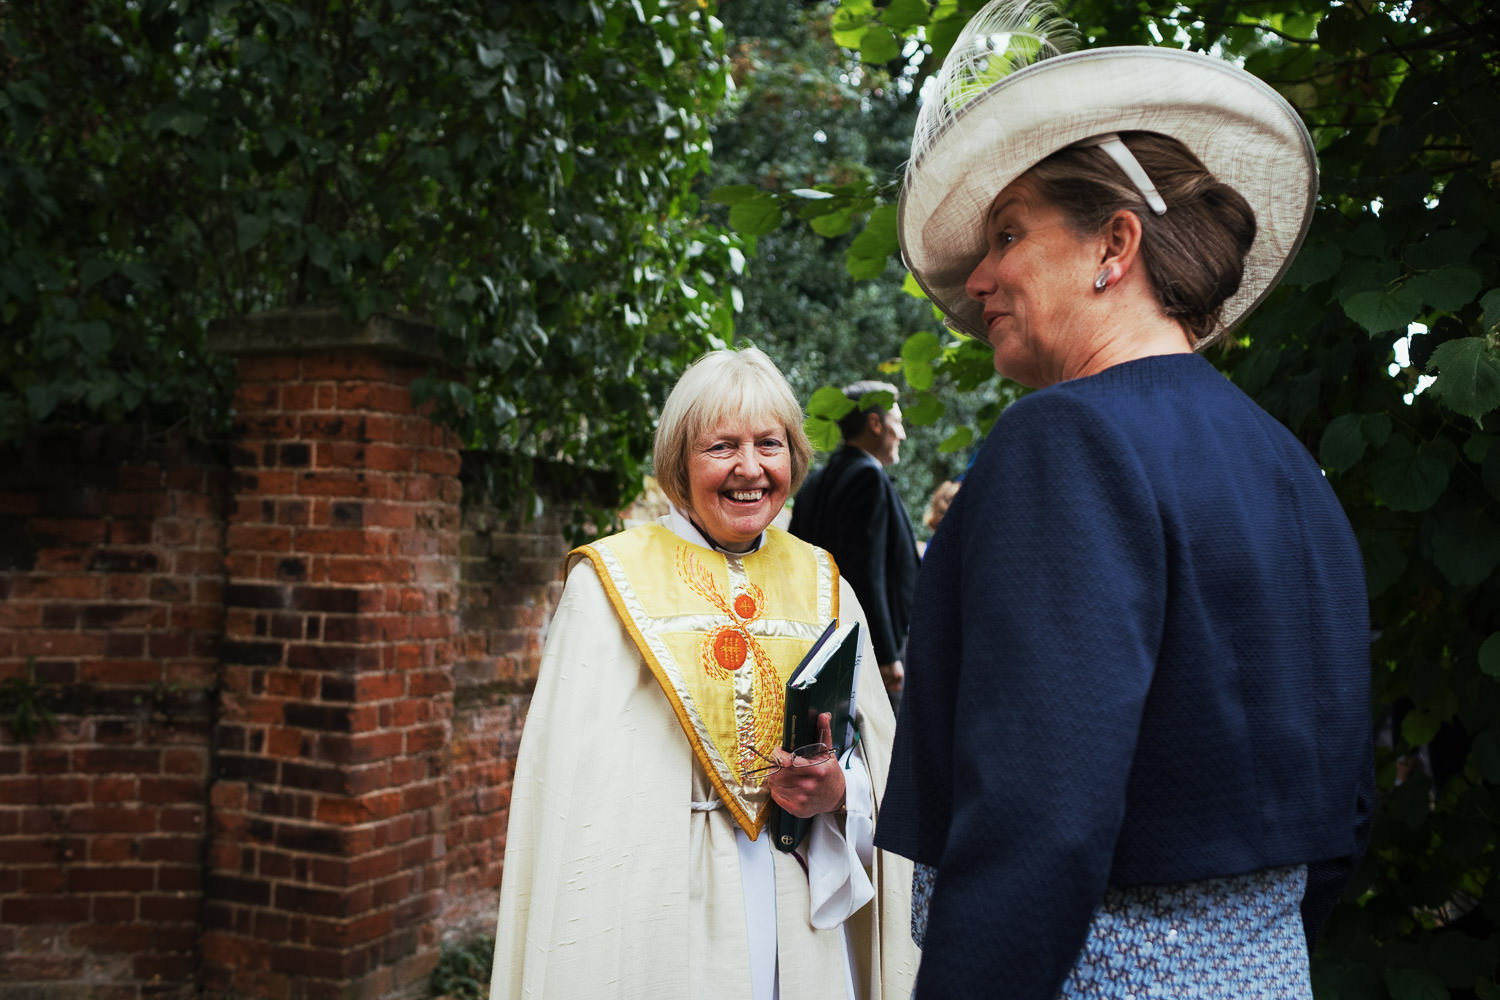 Revd Canon Jacqui Jones smiling at the camera in the grounds of the Parish Church of St John Baptist in Danbury after a wedding.